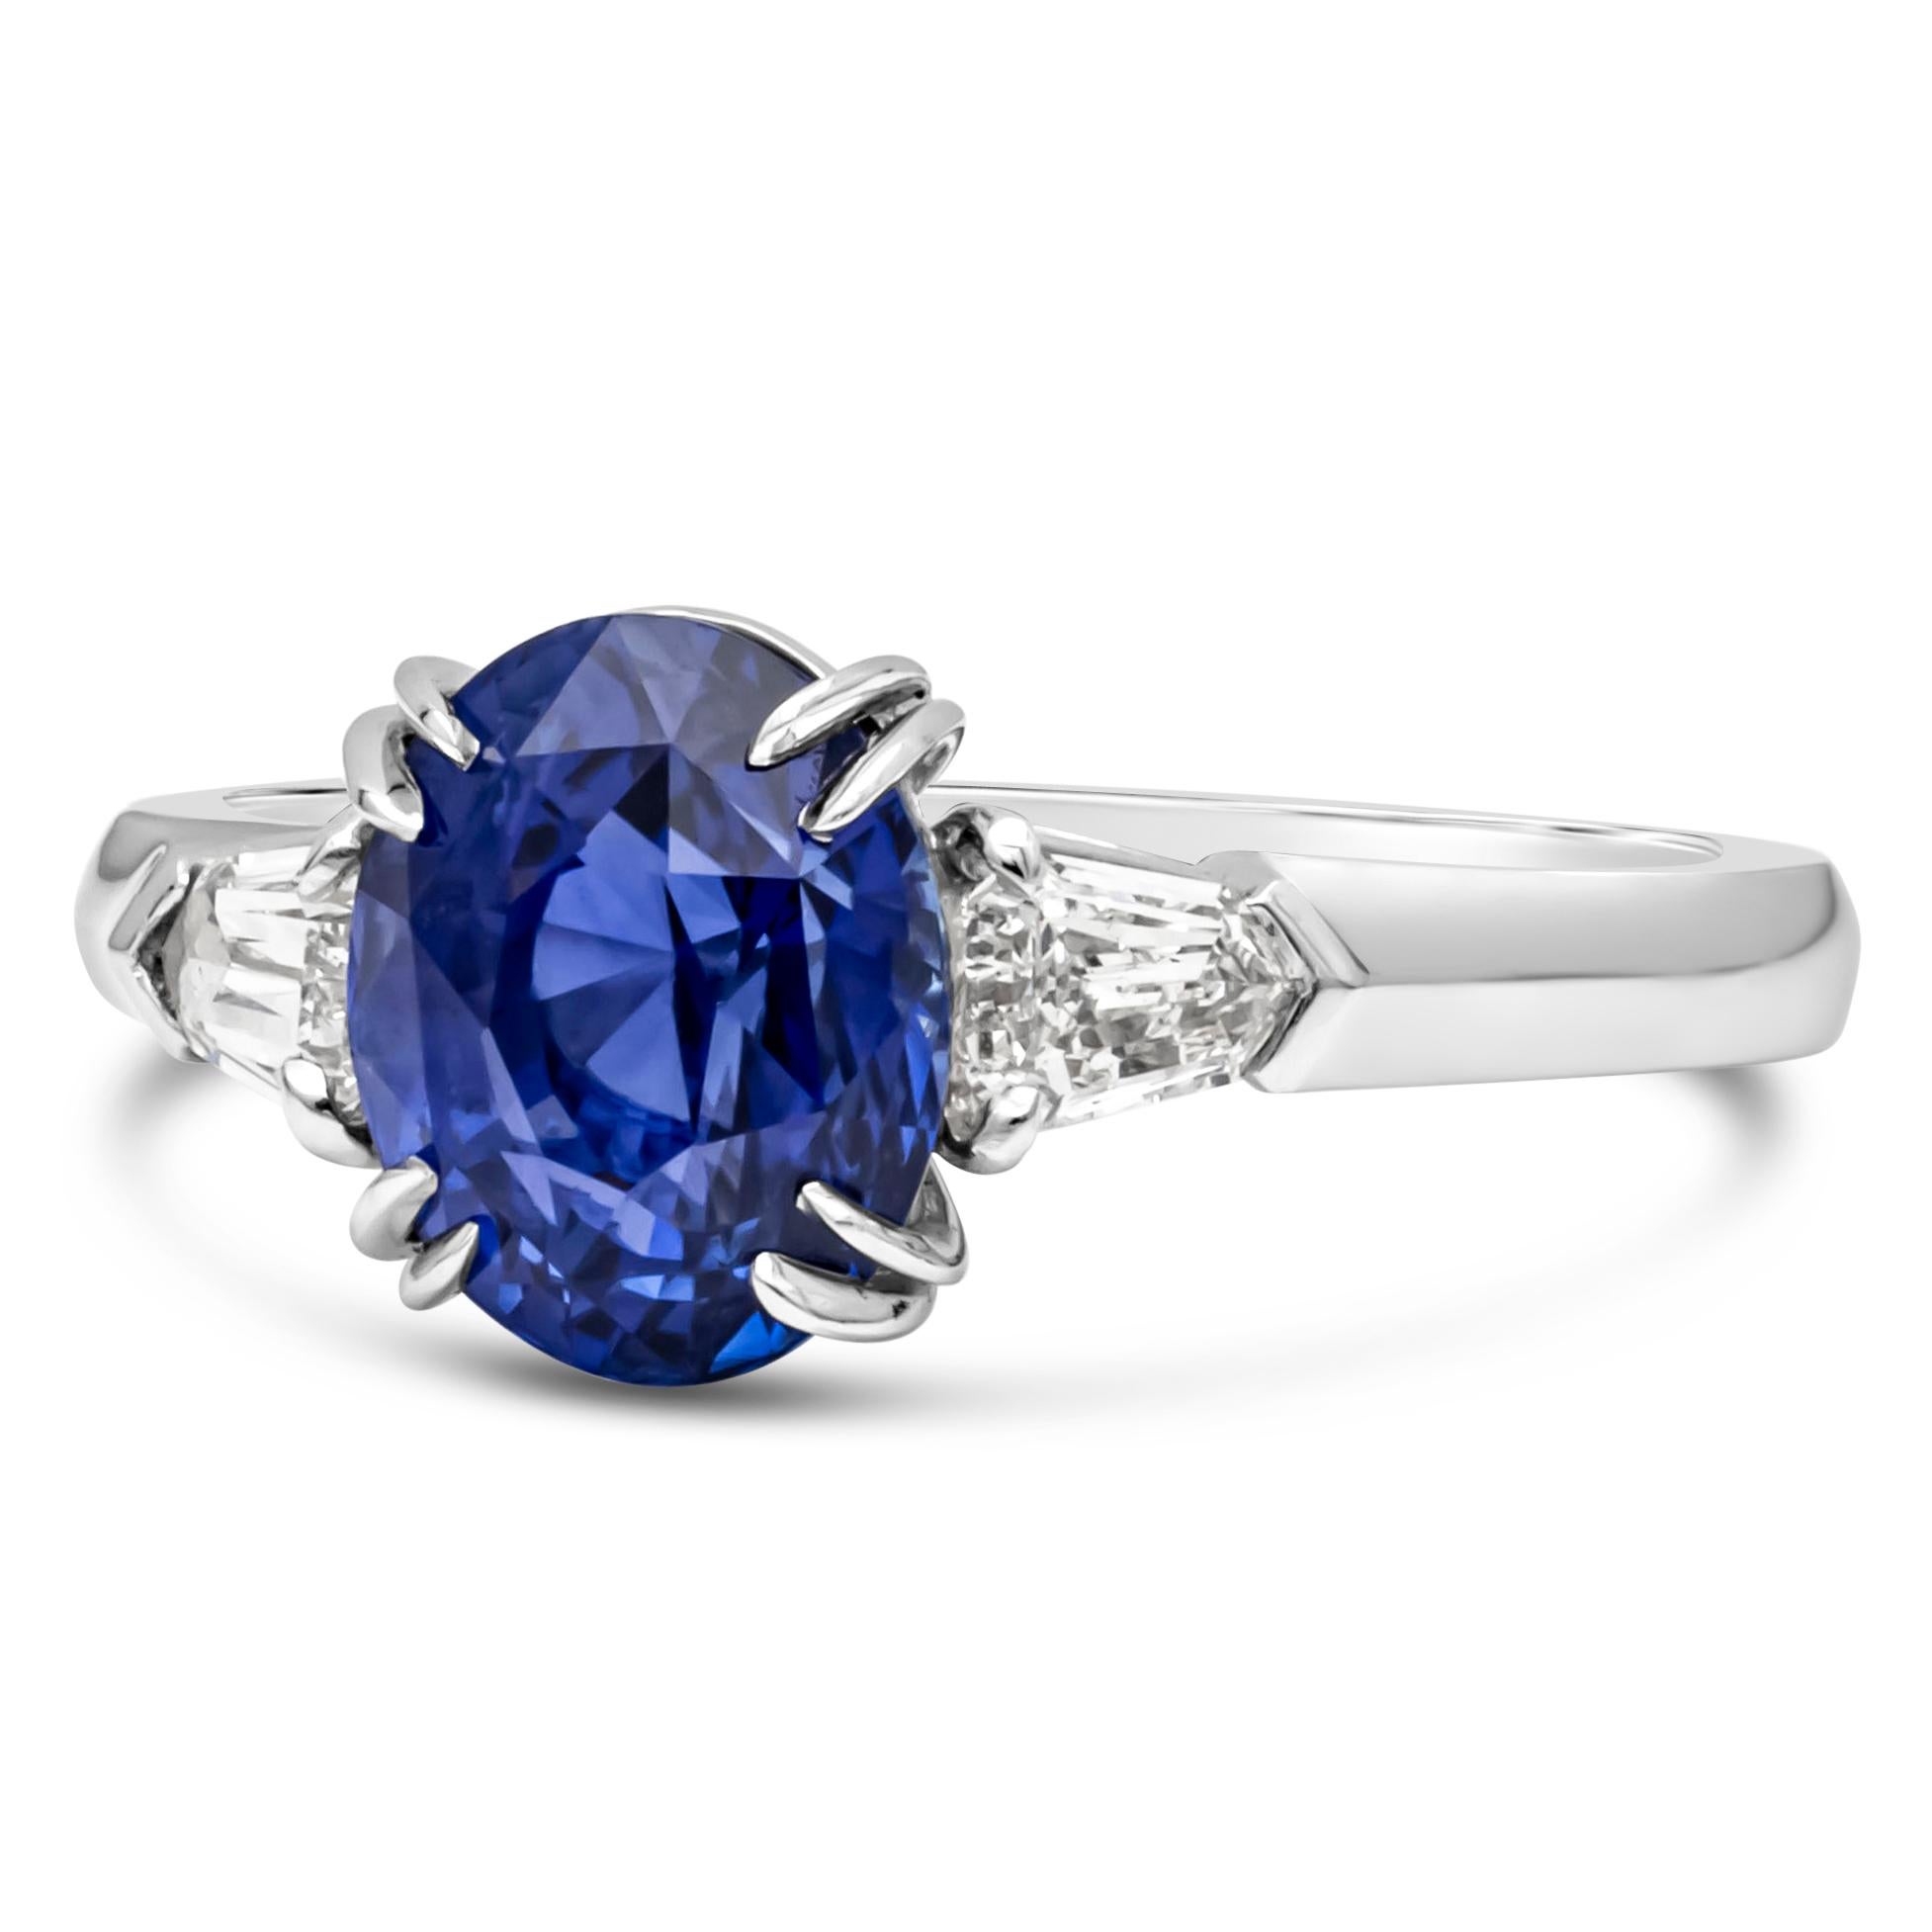 Features a gorgeous 2.38 carats oval cut natural sapphire that GIA certified as Blue in color with no indications of heating on the stone. Flanked by a bullet cut diamond side stone on each side weighing 0.29 carats total. Finely set in platinum.